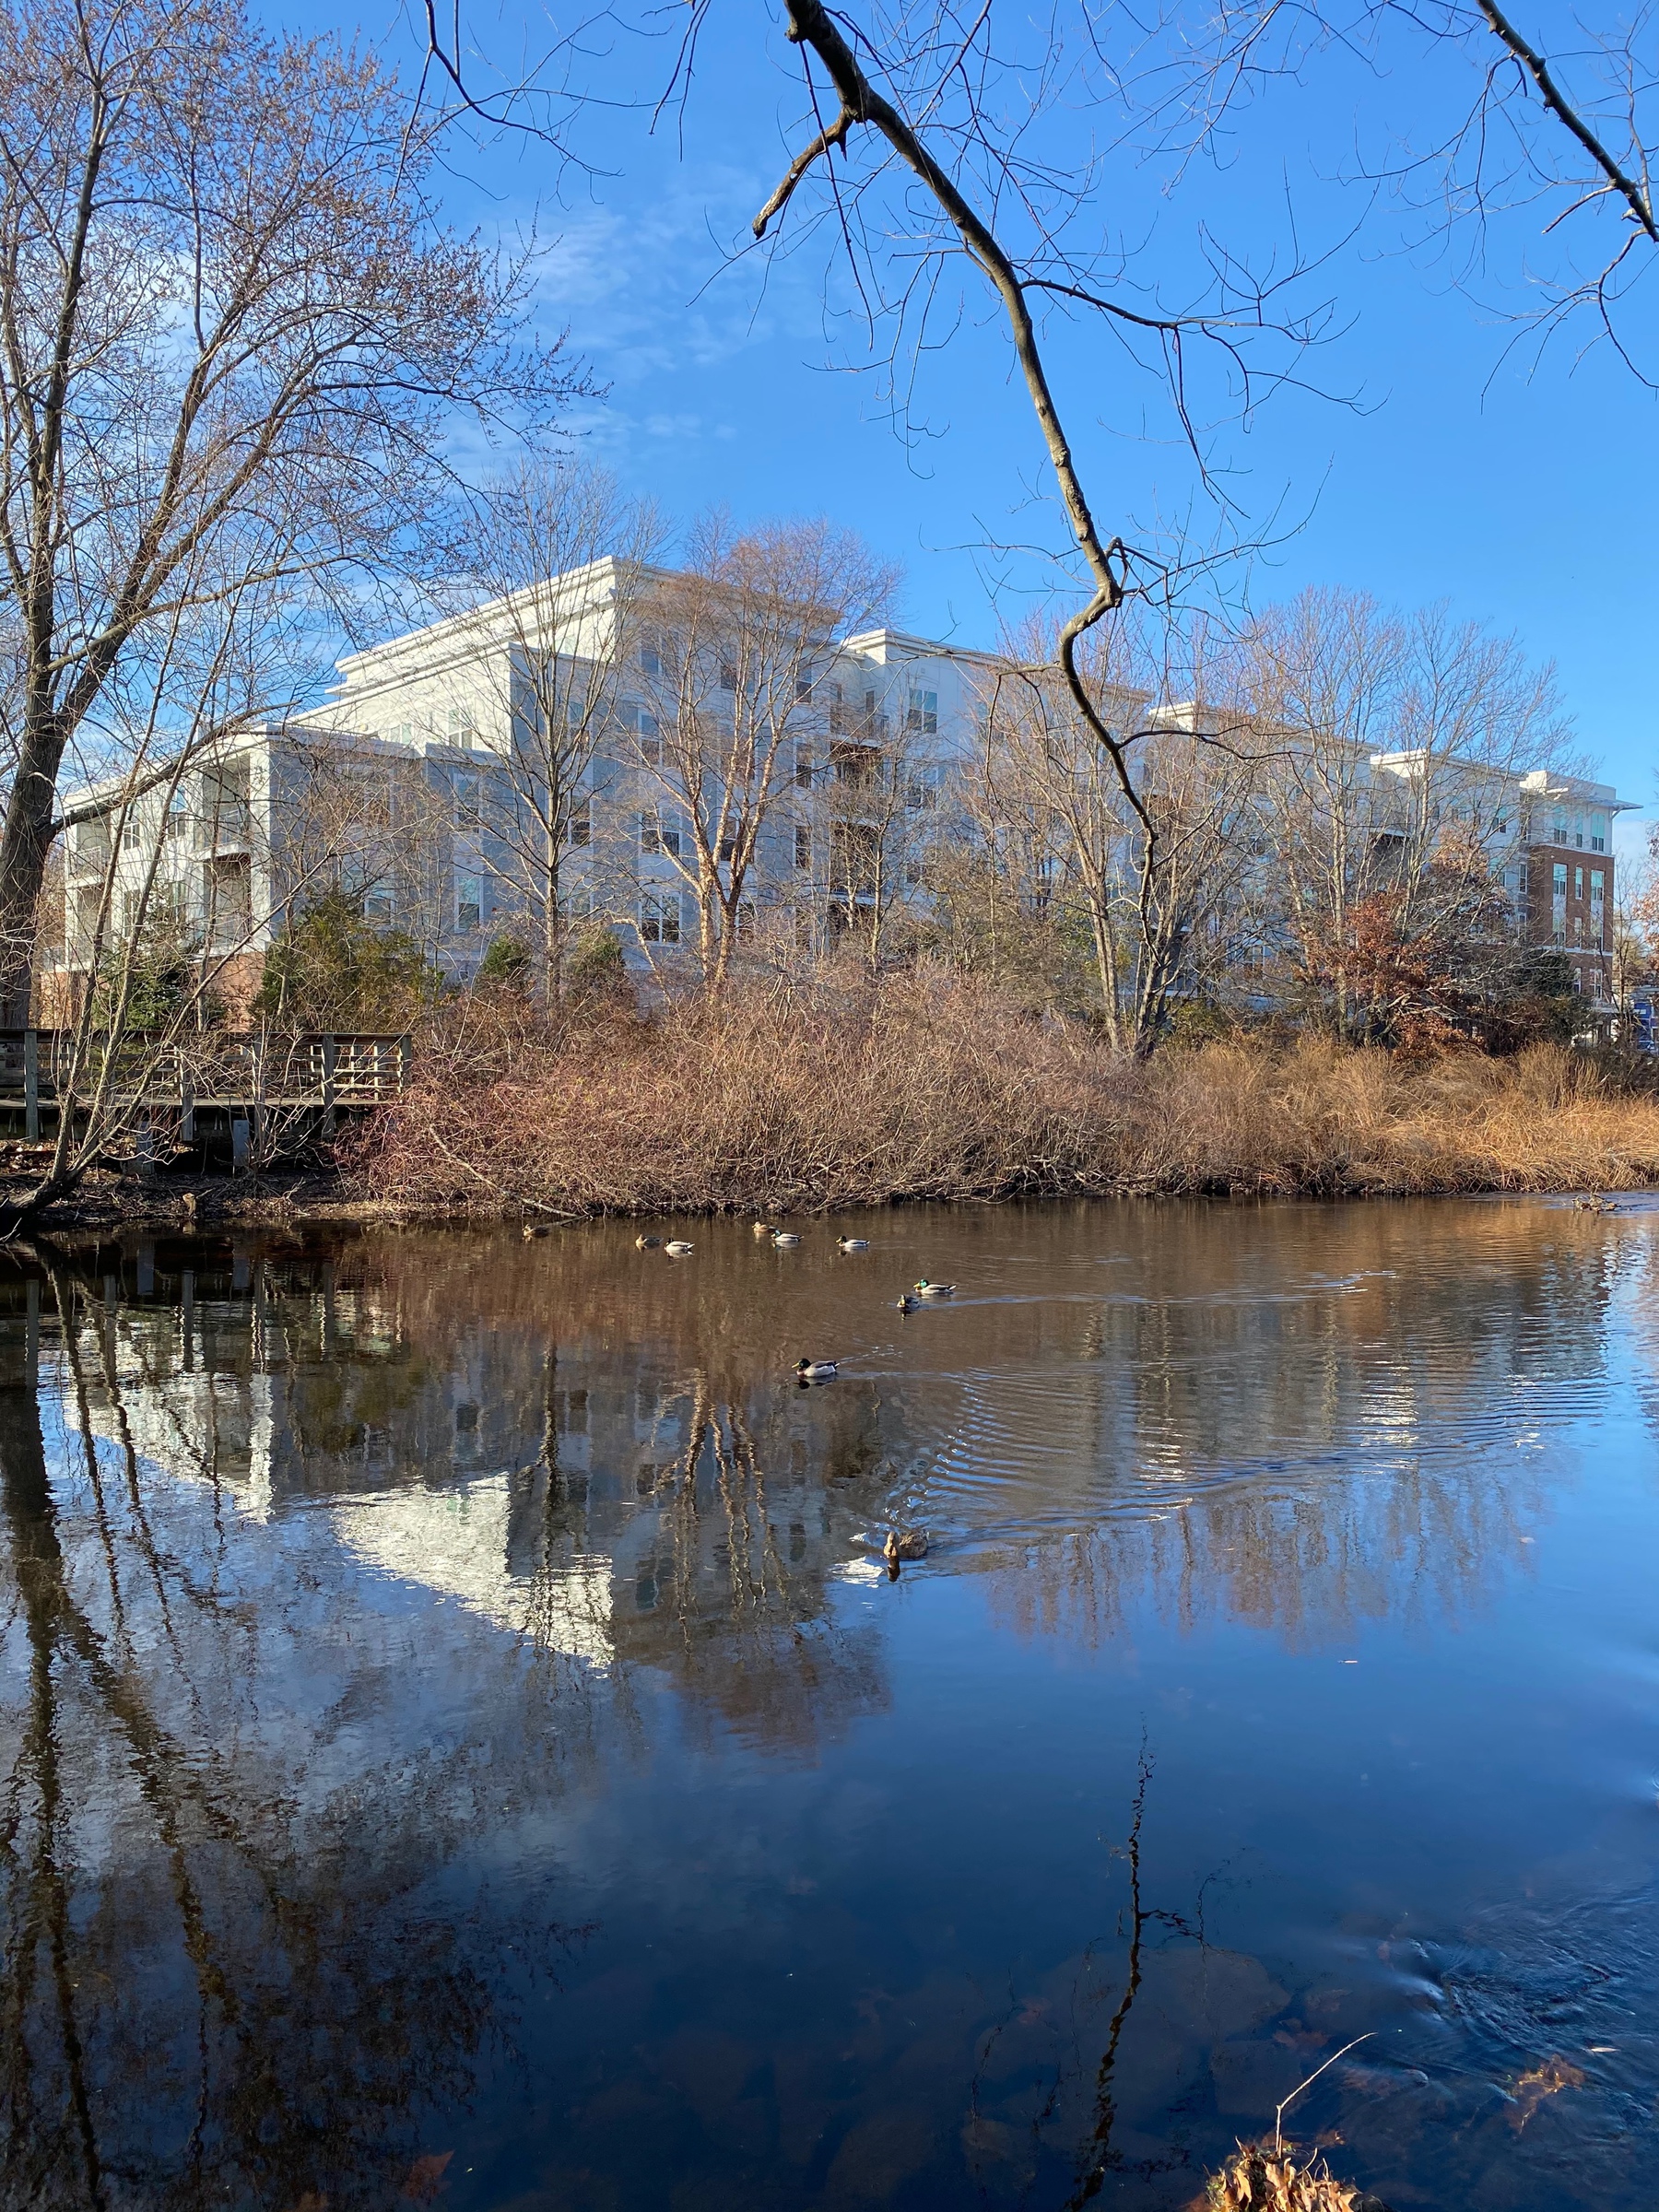 View of a large apartment building on the far bank of a river, with the building and blue sky reflected in the calm waters, and ducks.